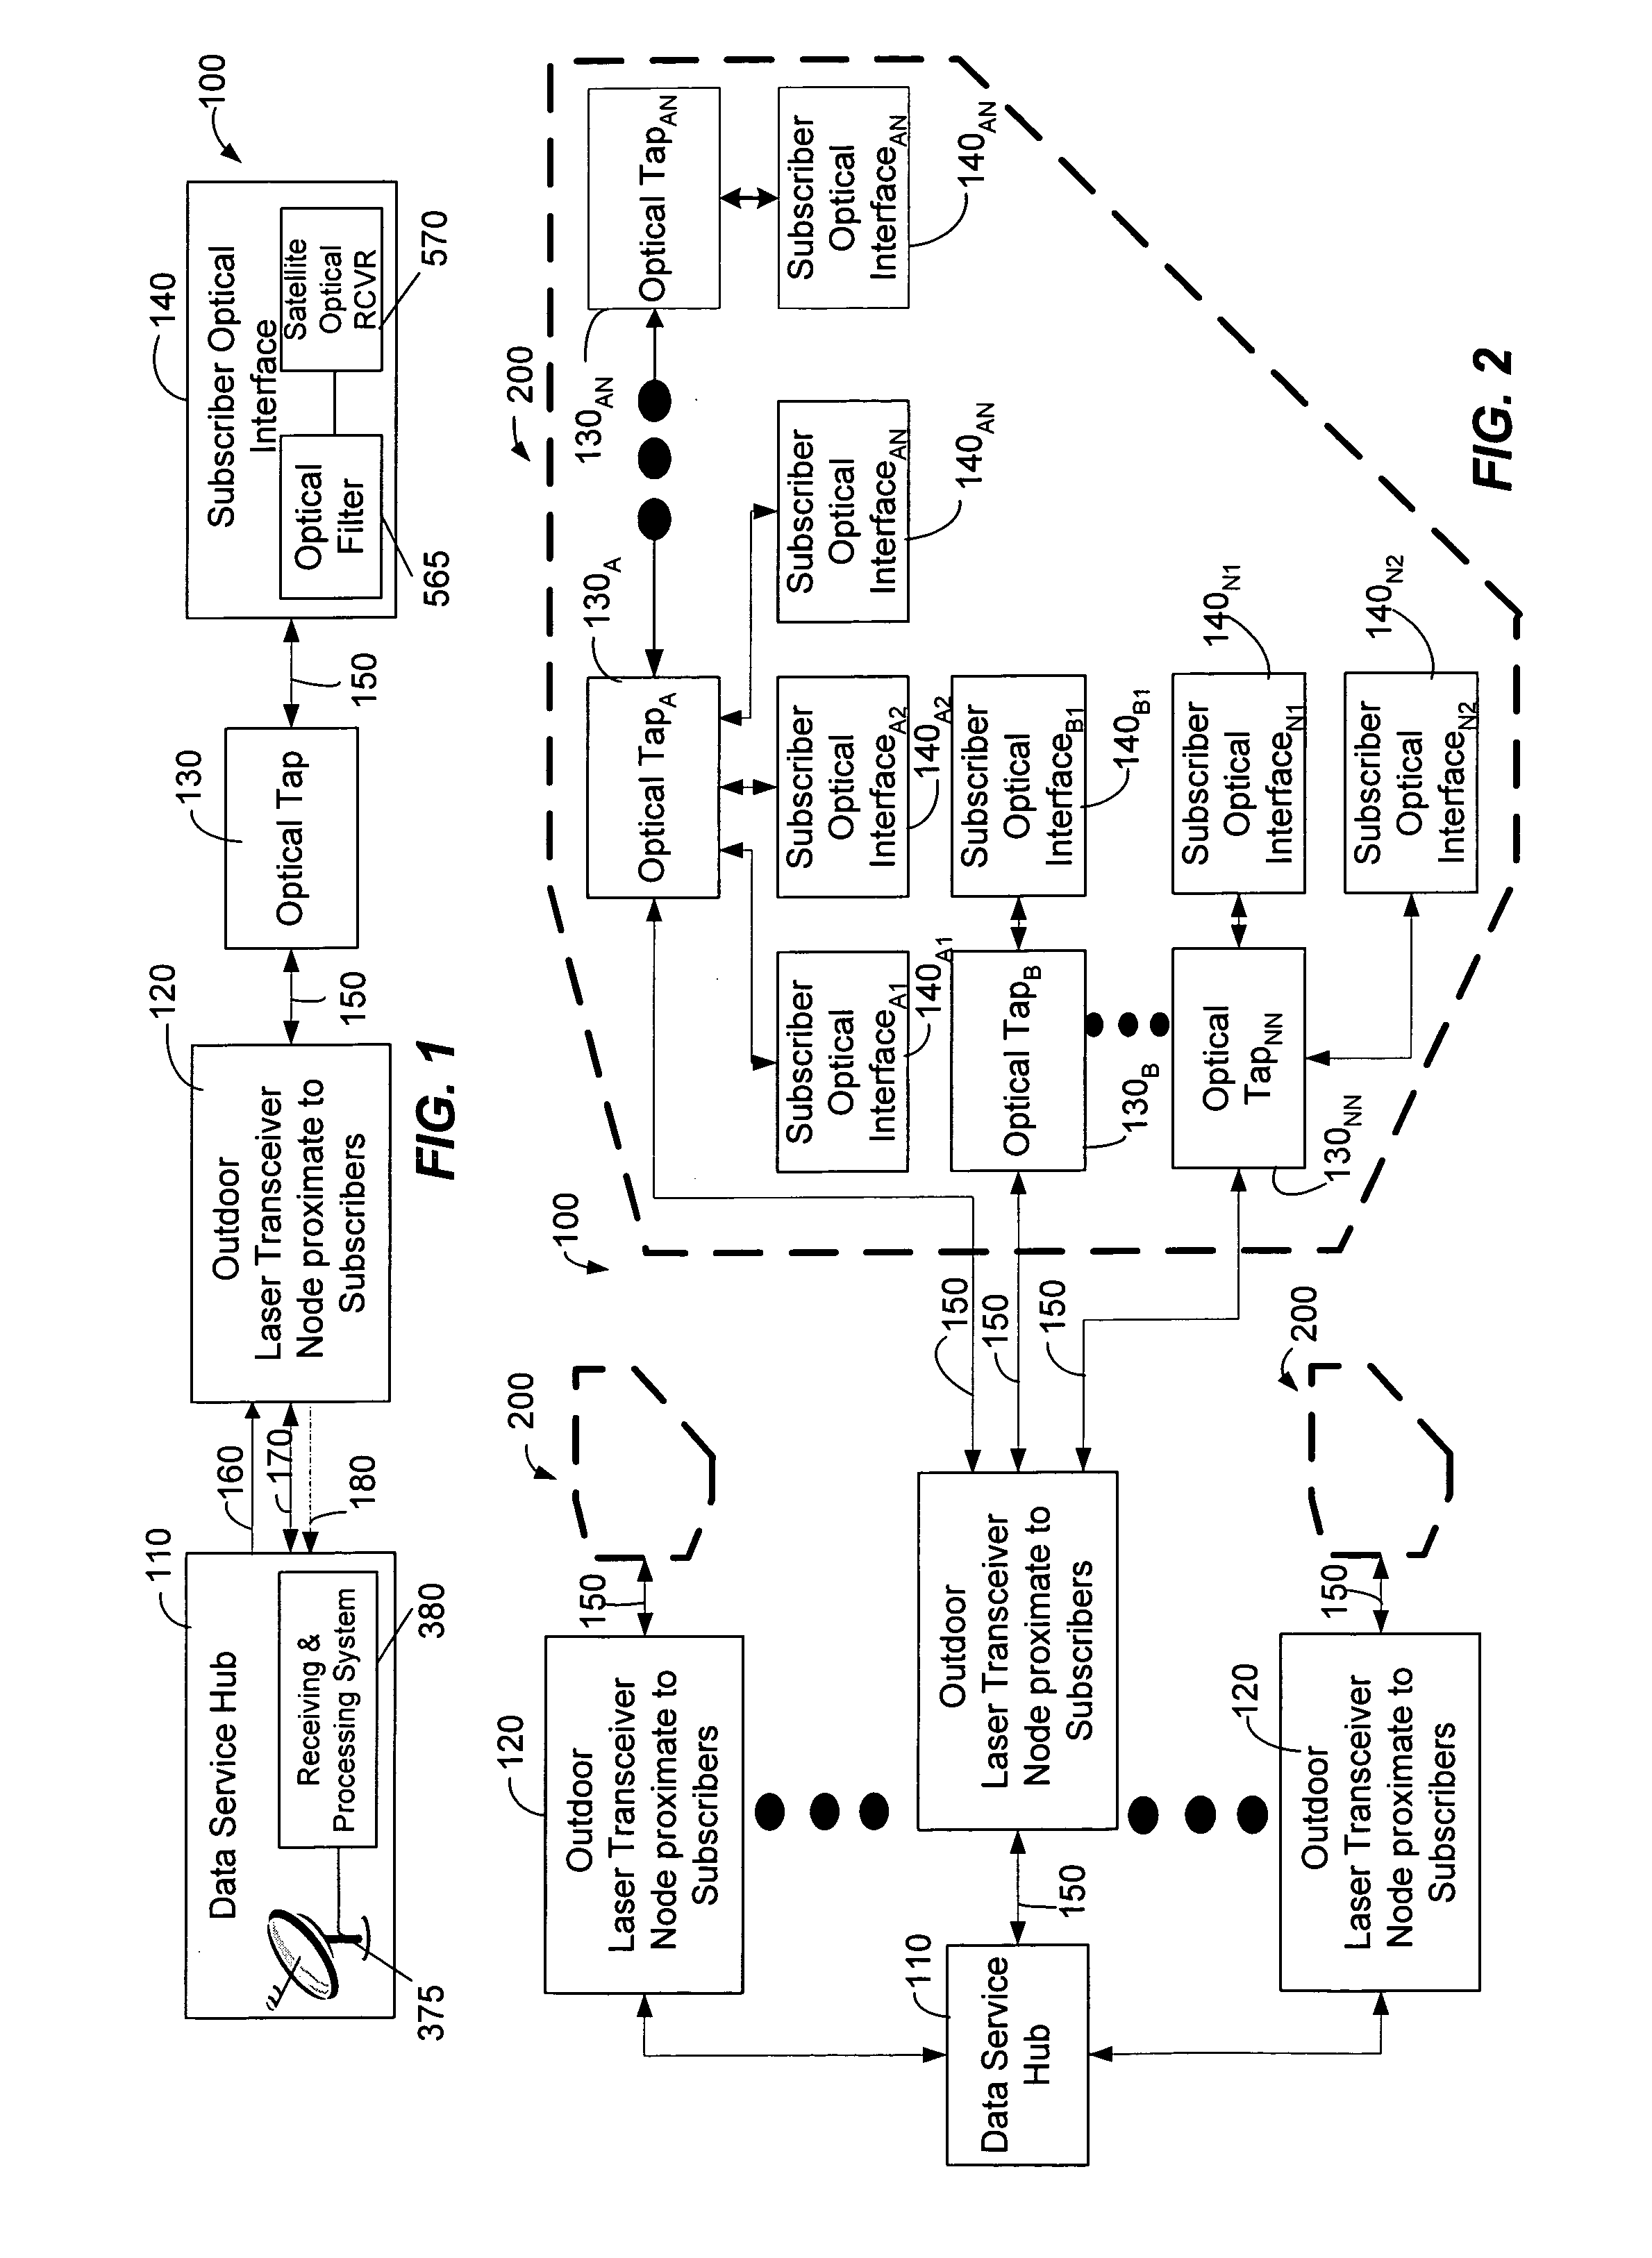 System and method for propagating satellite TV-band, cable TV-band, and data signals over an optical network